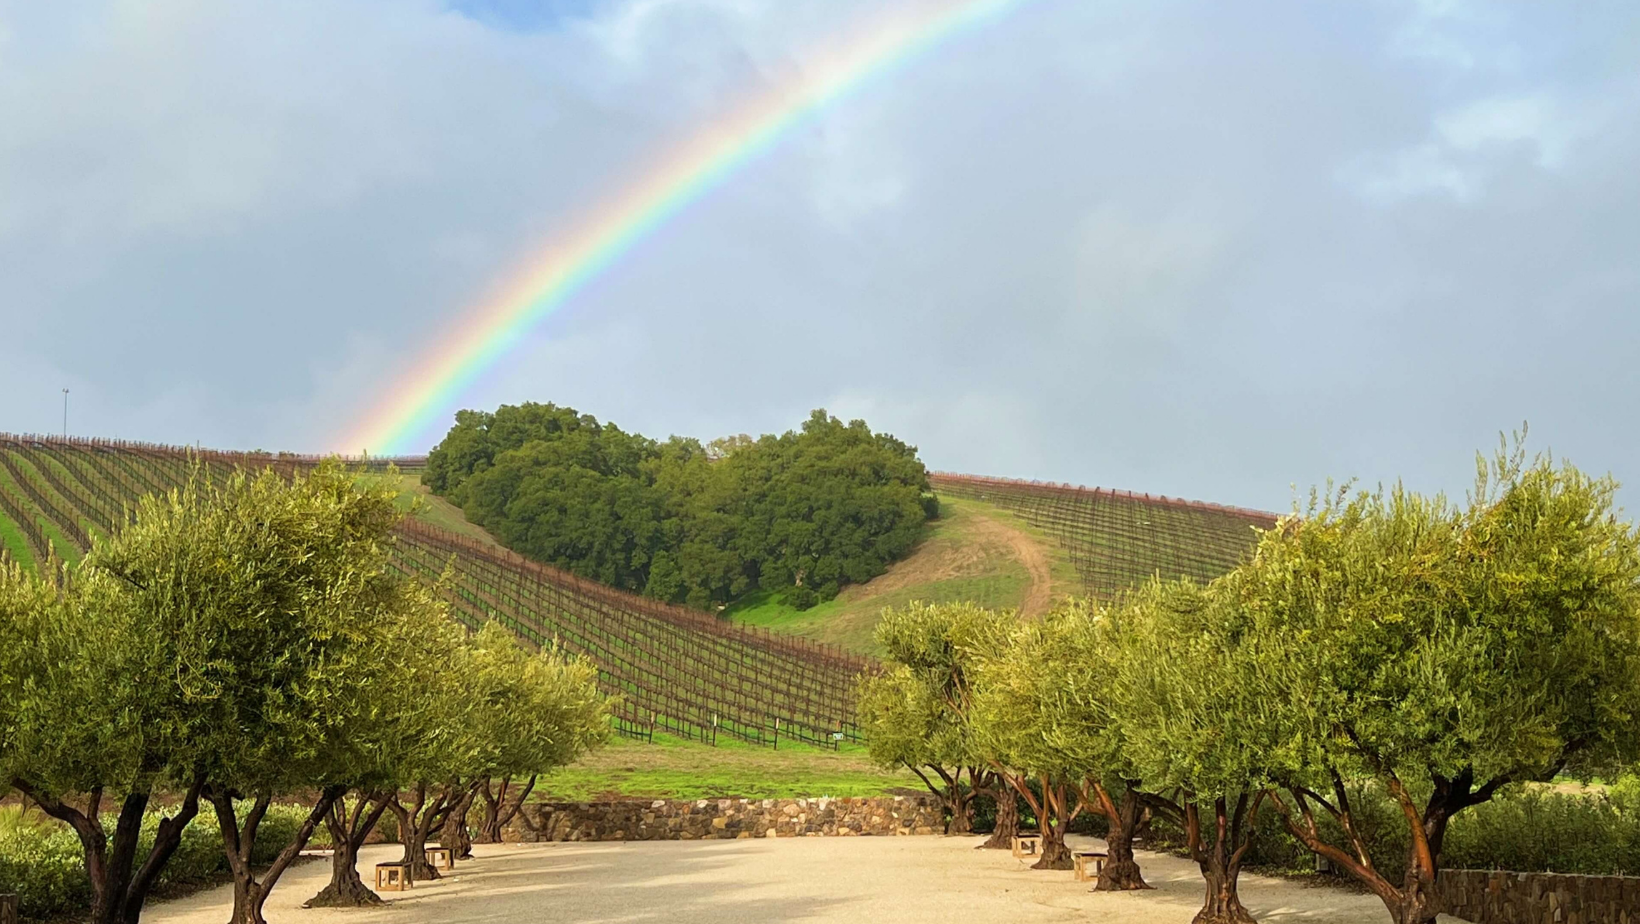 A rainbow over Heart Hill Vineyard with green cover crop between rows